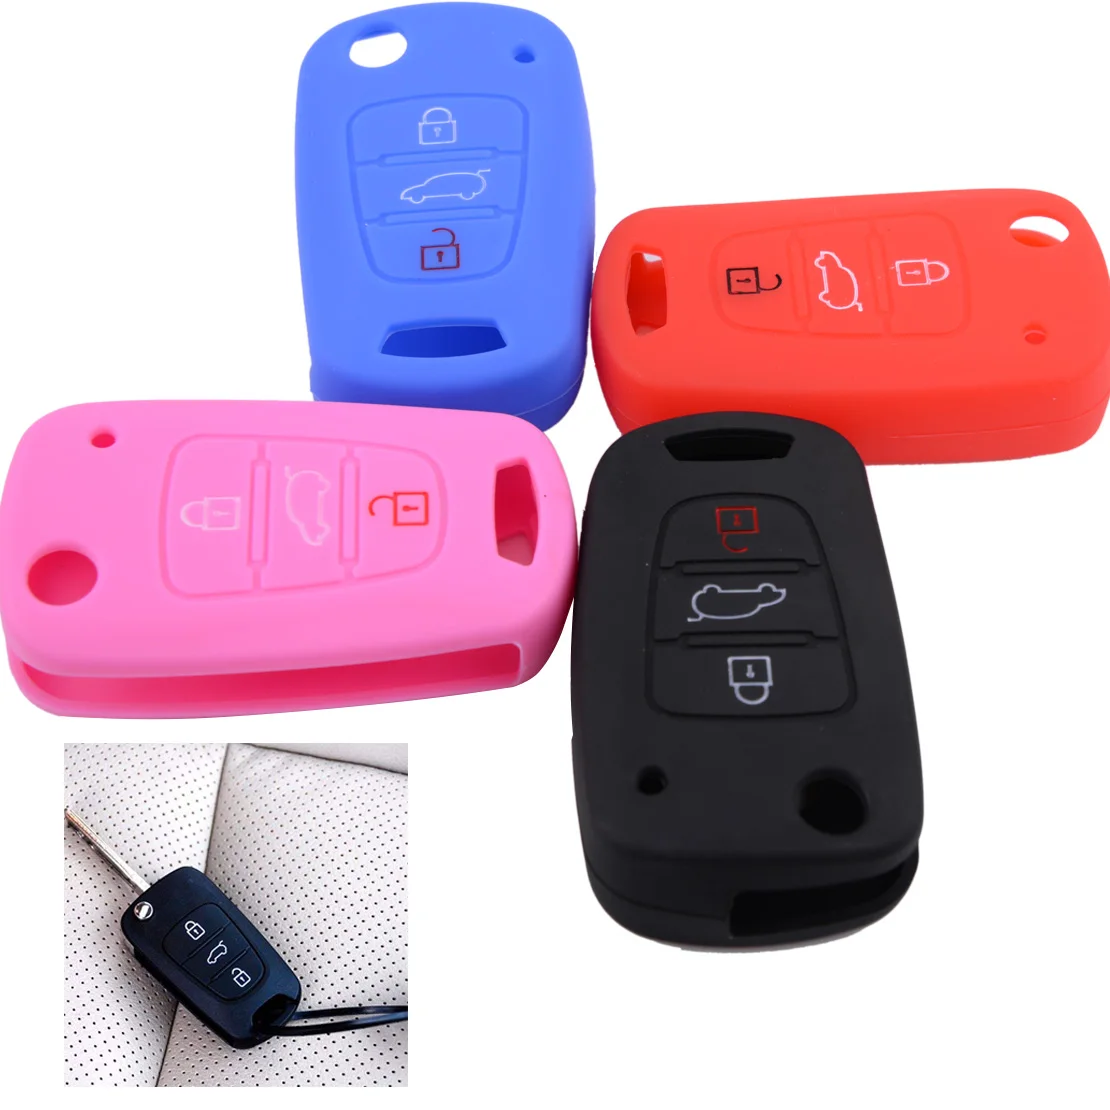 1x 3 Buttons Silicone Key Cover Shell Case Fob For Kia Soul Sportage Elantra i30 